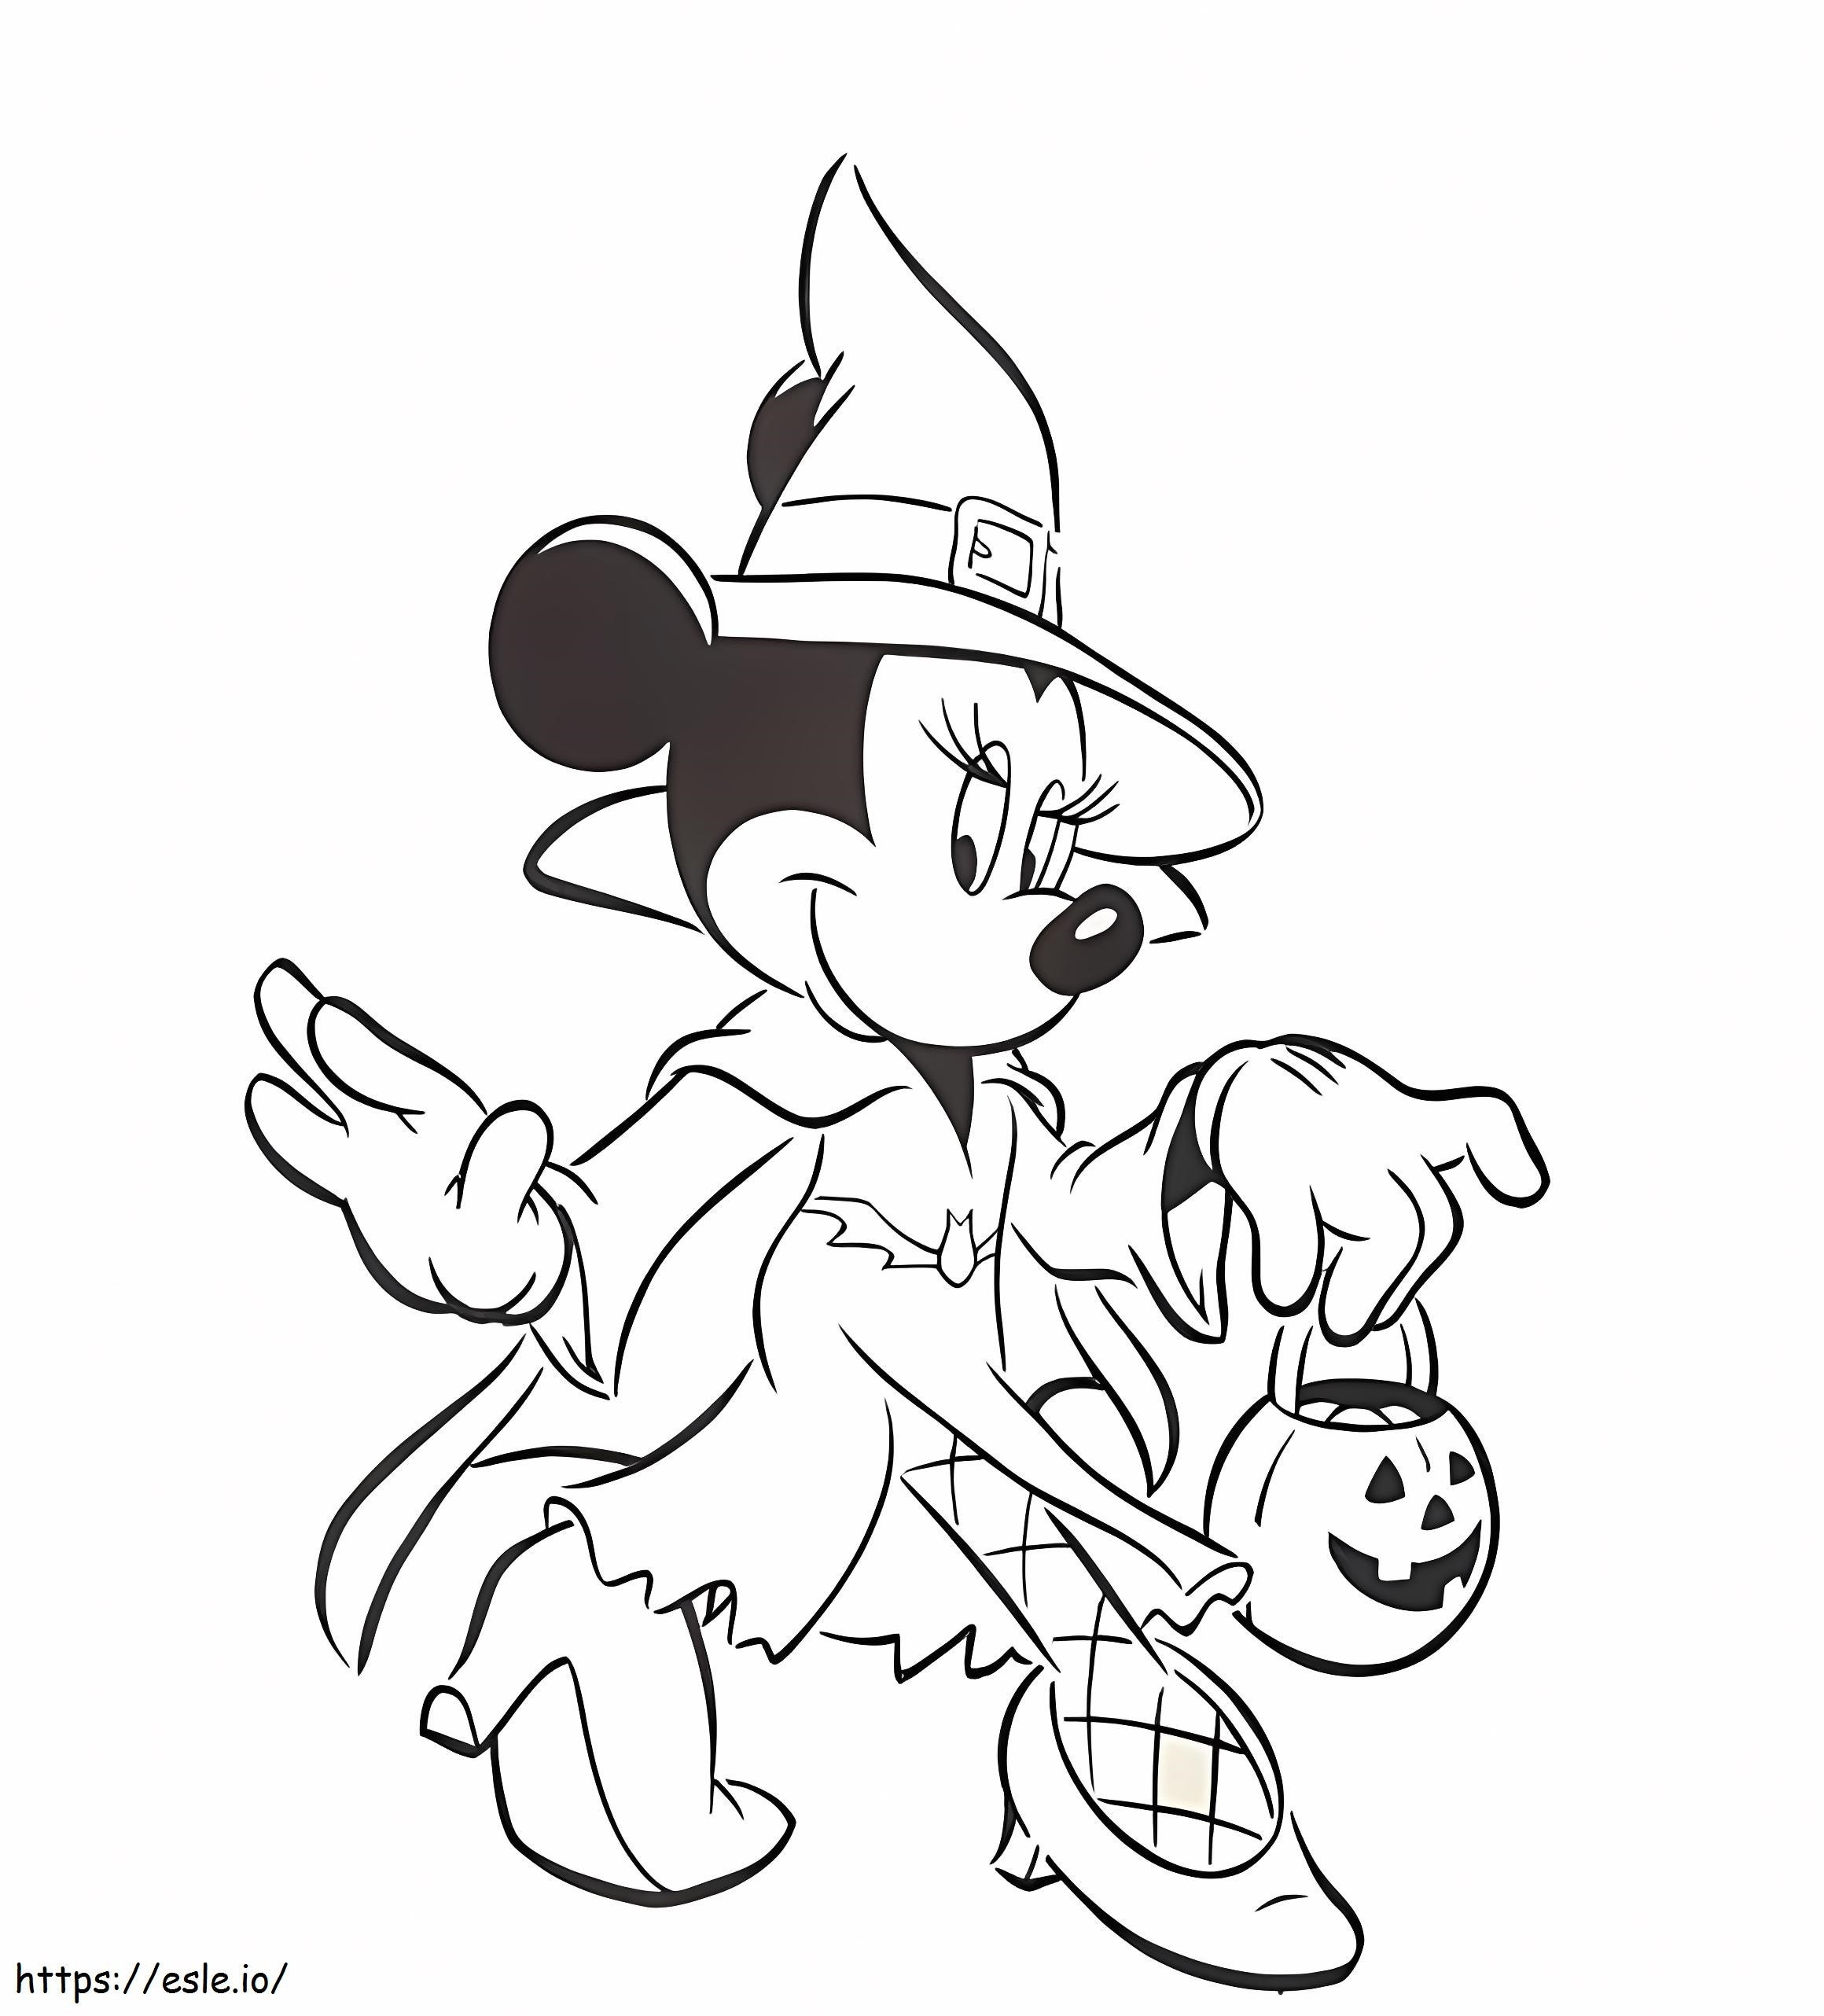 Minnie Mouse Witch Holding Pumpkin coloring page